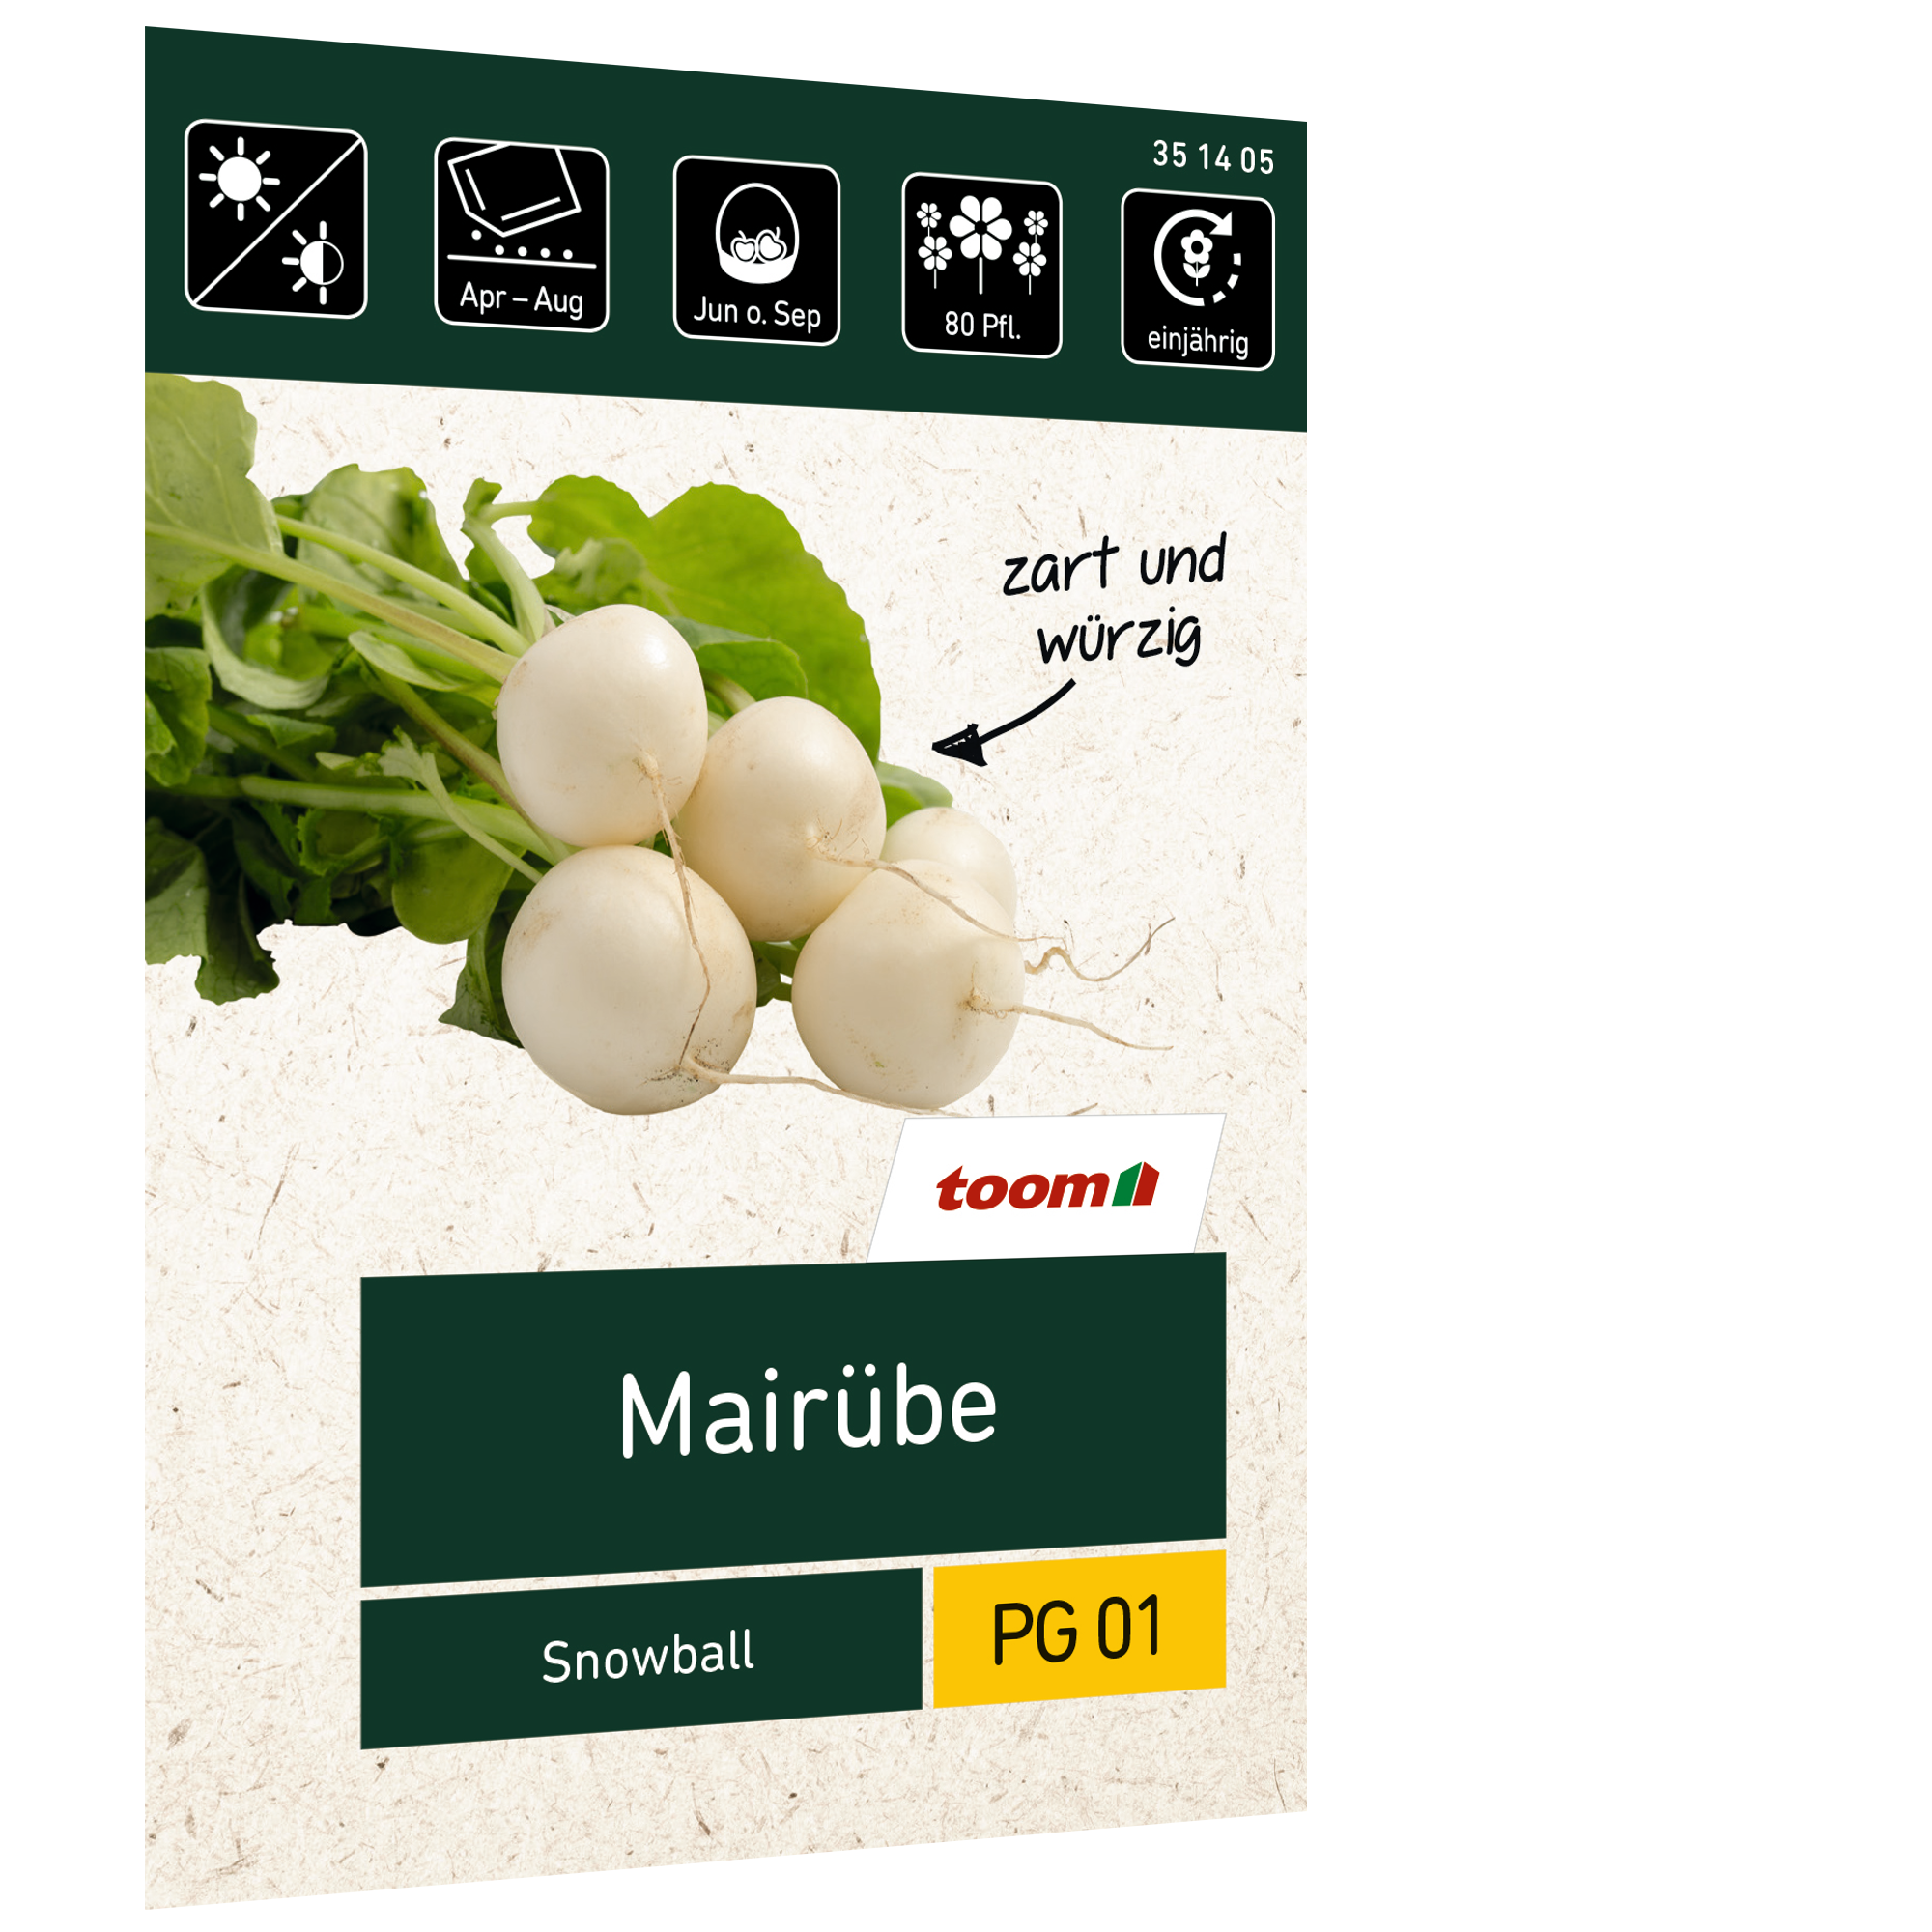 Mairübe 'Snowball' + product picture